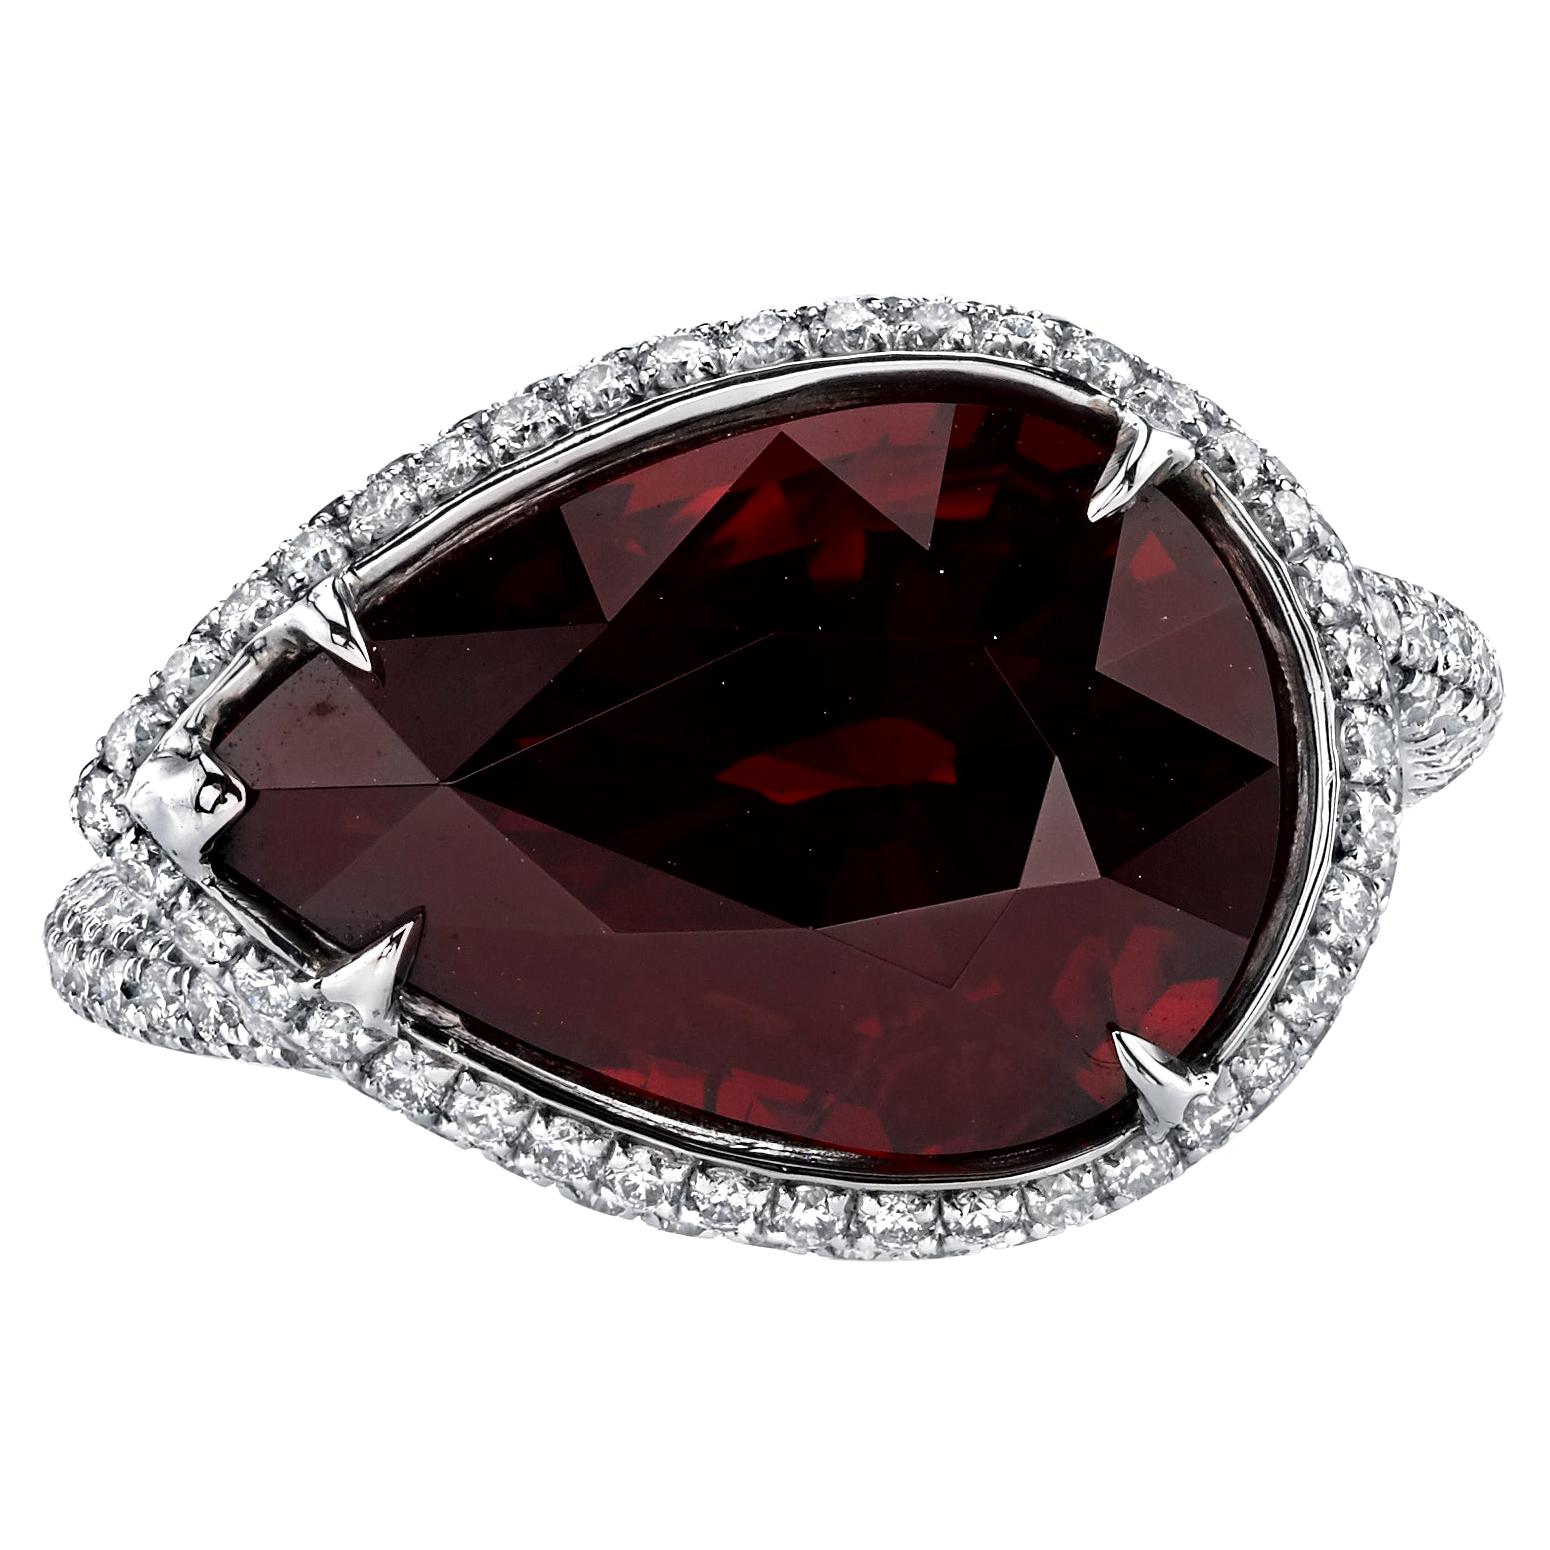 10.34 Ct Garnet Ring is Set in 18KW, Adorned with 1.60 Ct of Dazzling Diamonds